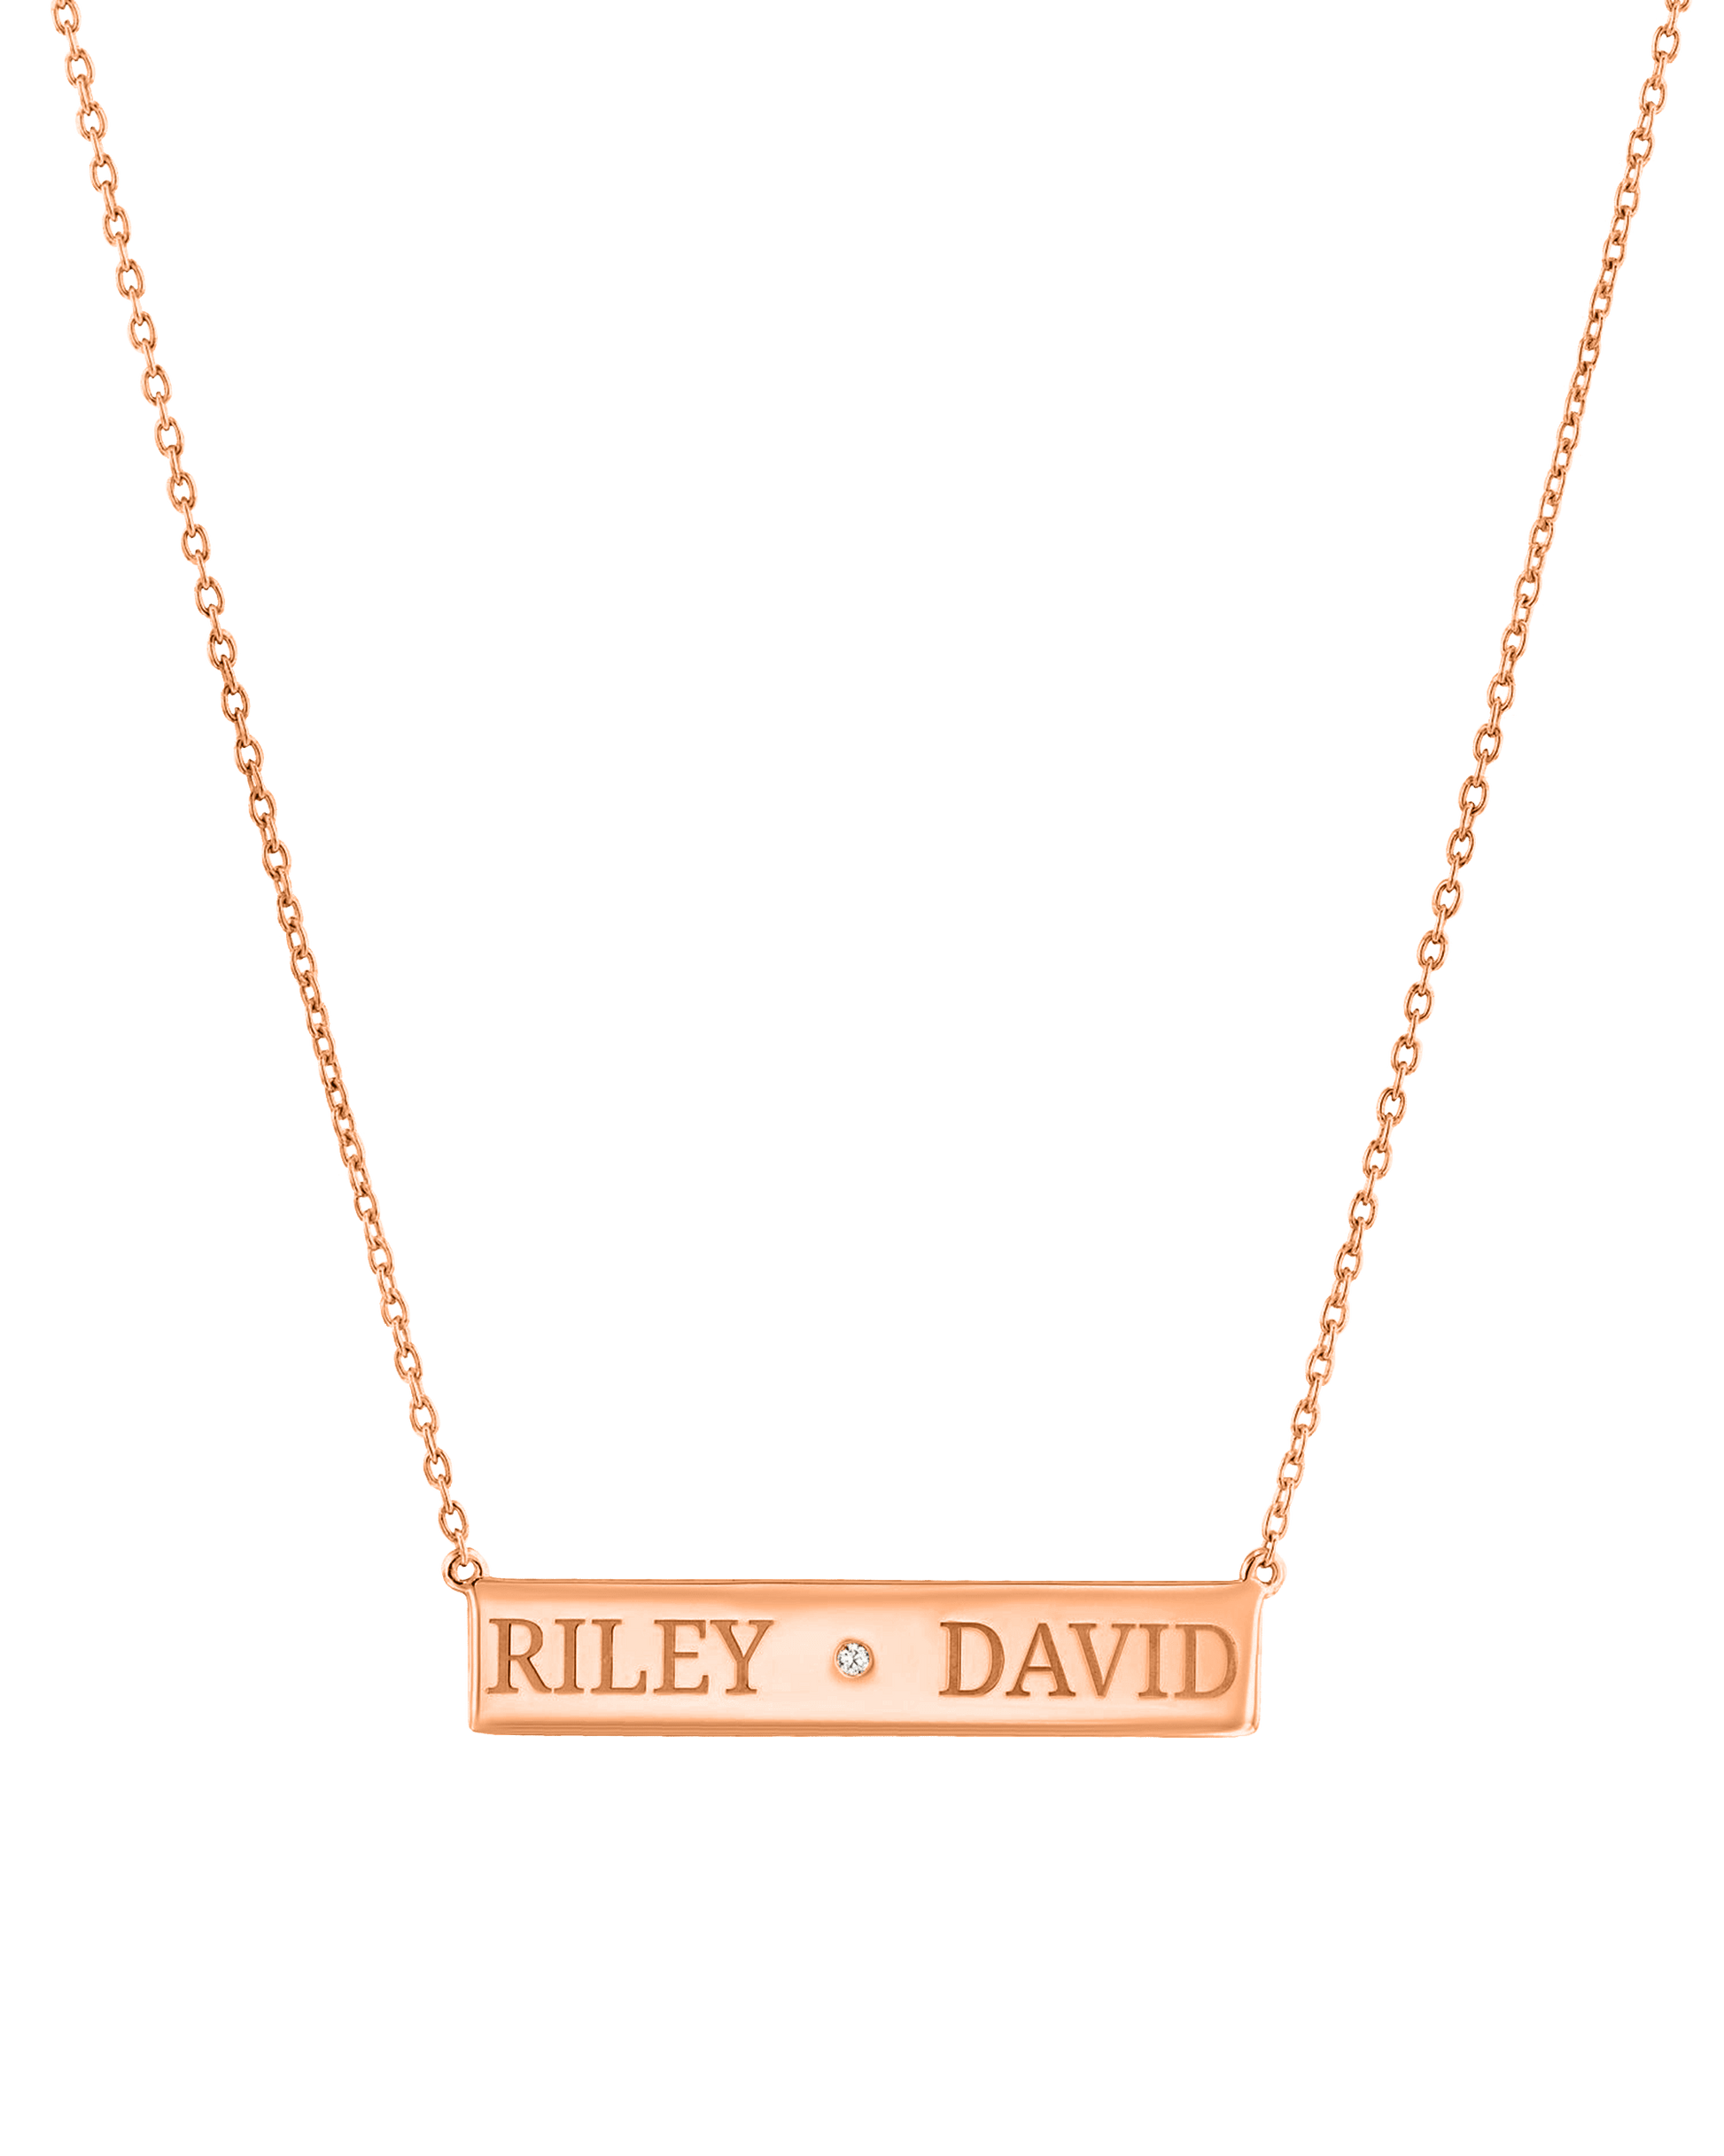 Just The Two Of Us Necklace - 18K Gold Vermeil Necklaces magal-dev 